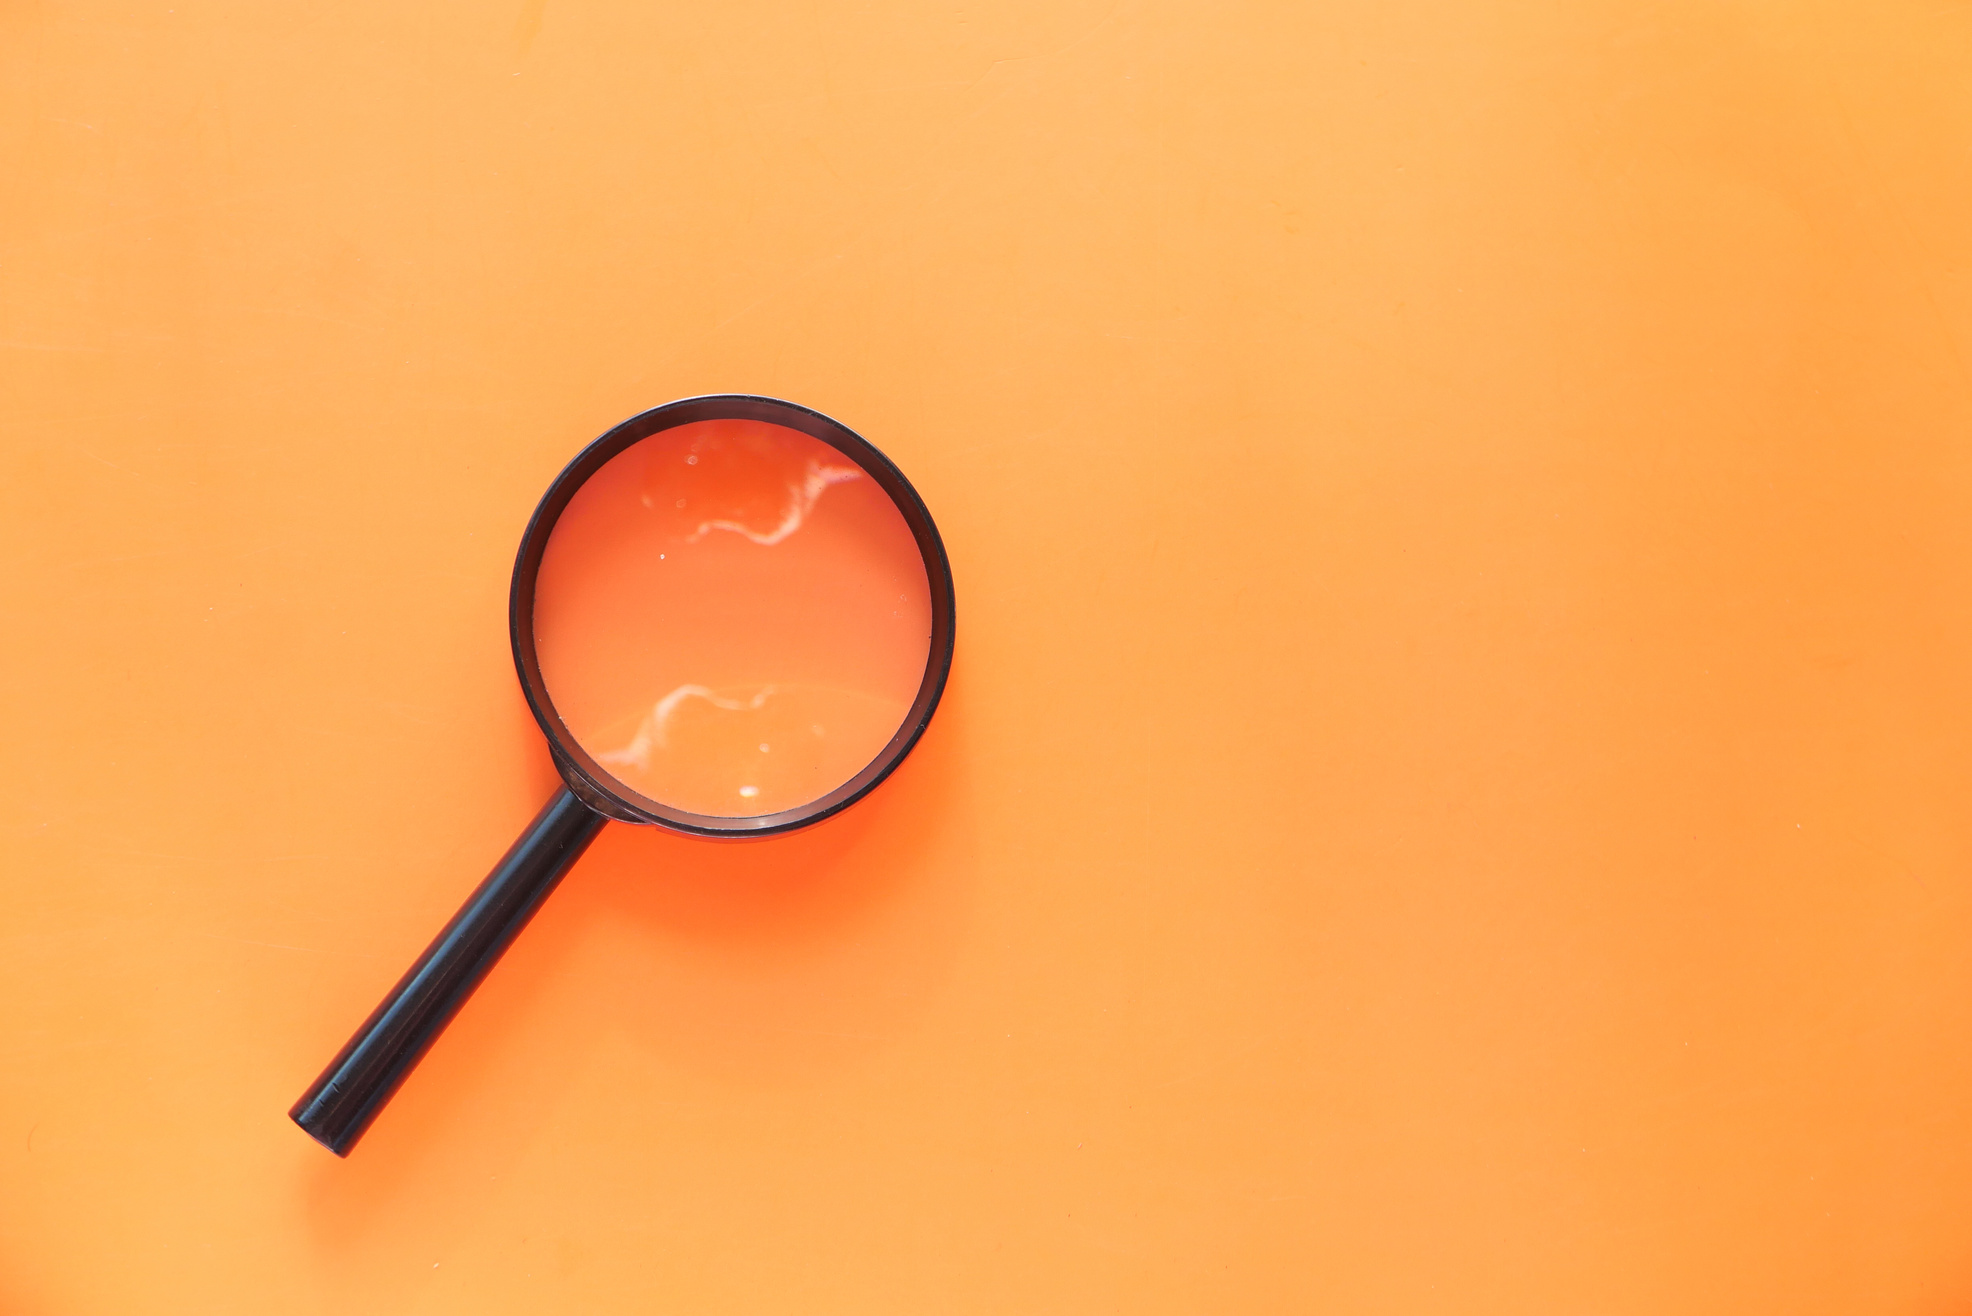 Top View of Magnifying Glass on Orange Background